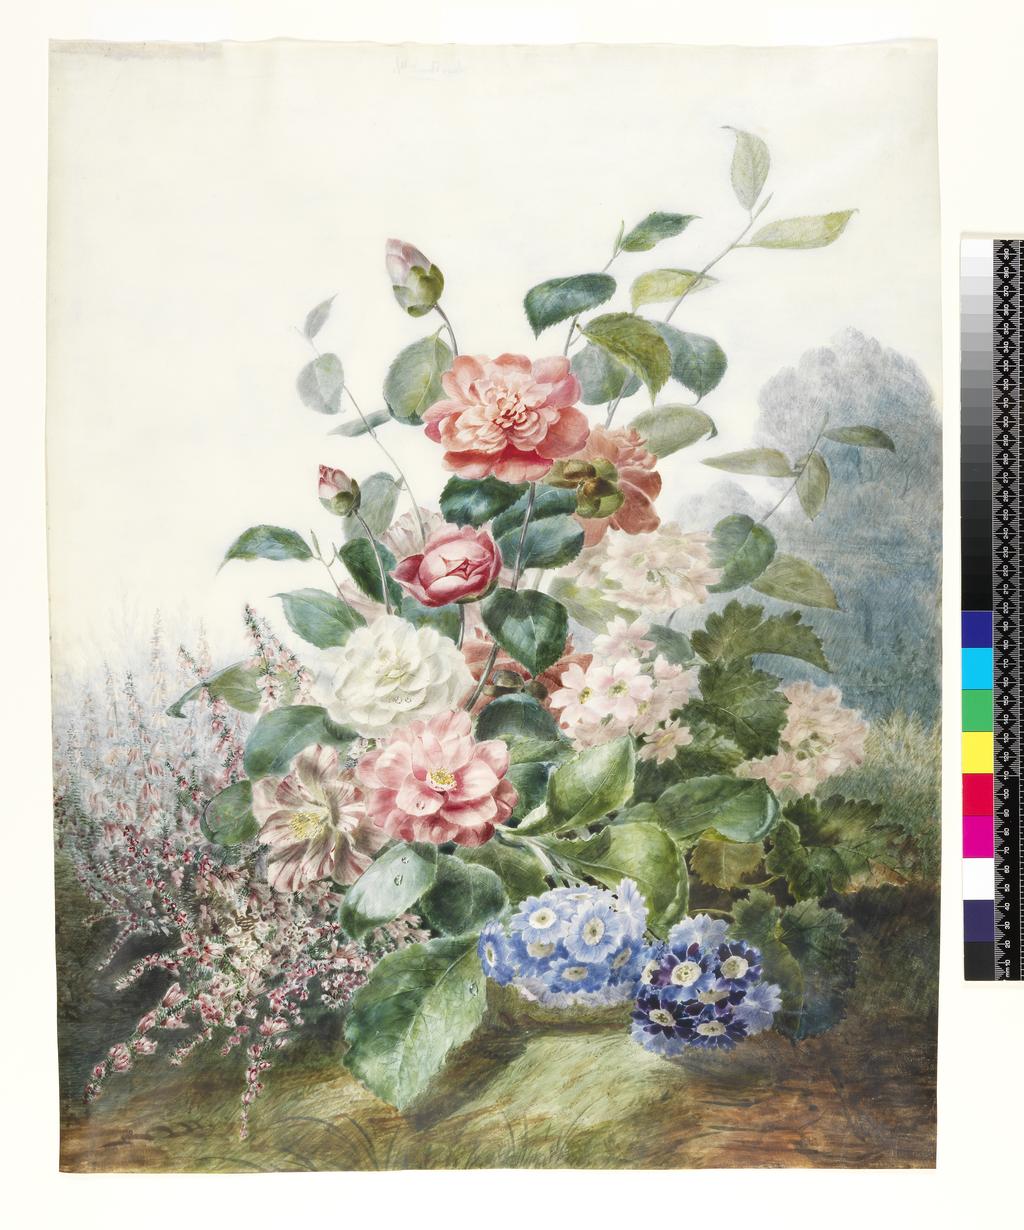 An image of Various Flowers Growing in a Landscape Setting. Pascal, Antoine (French, 1803-1859). Watercolour on vellum. Height: 604 mm, width: 470 mm. 19th Century.